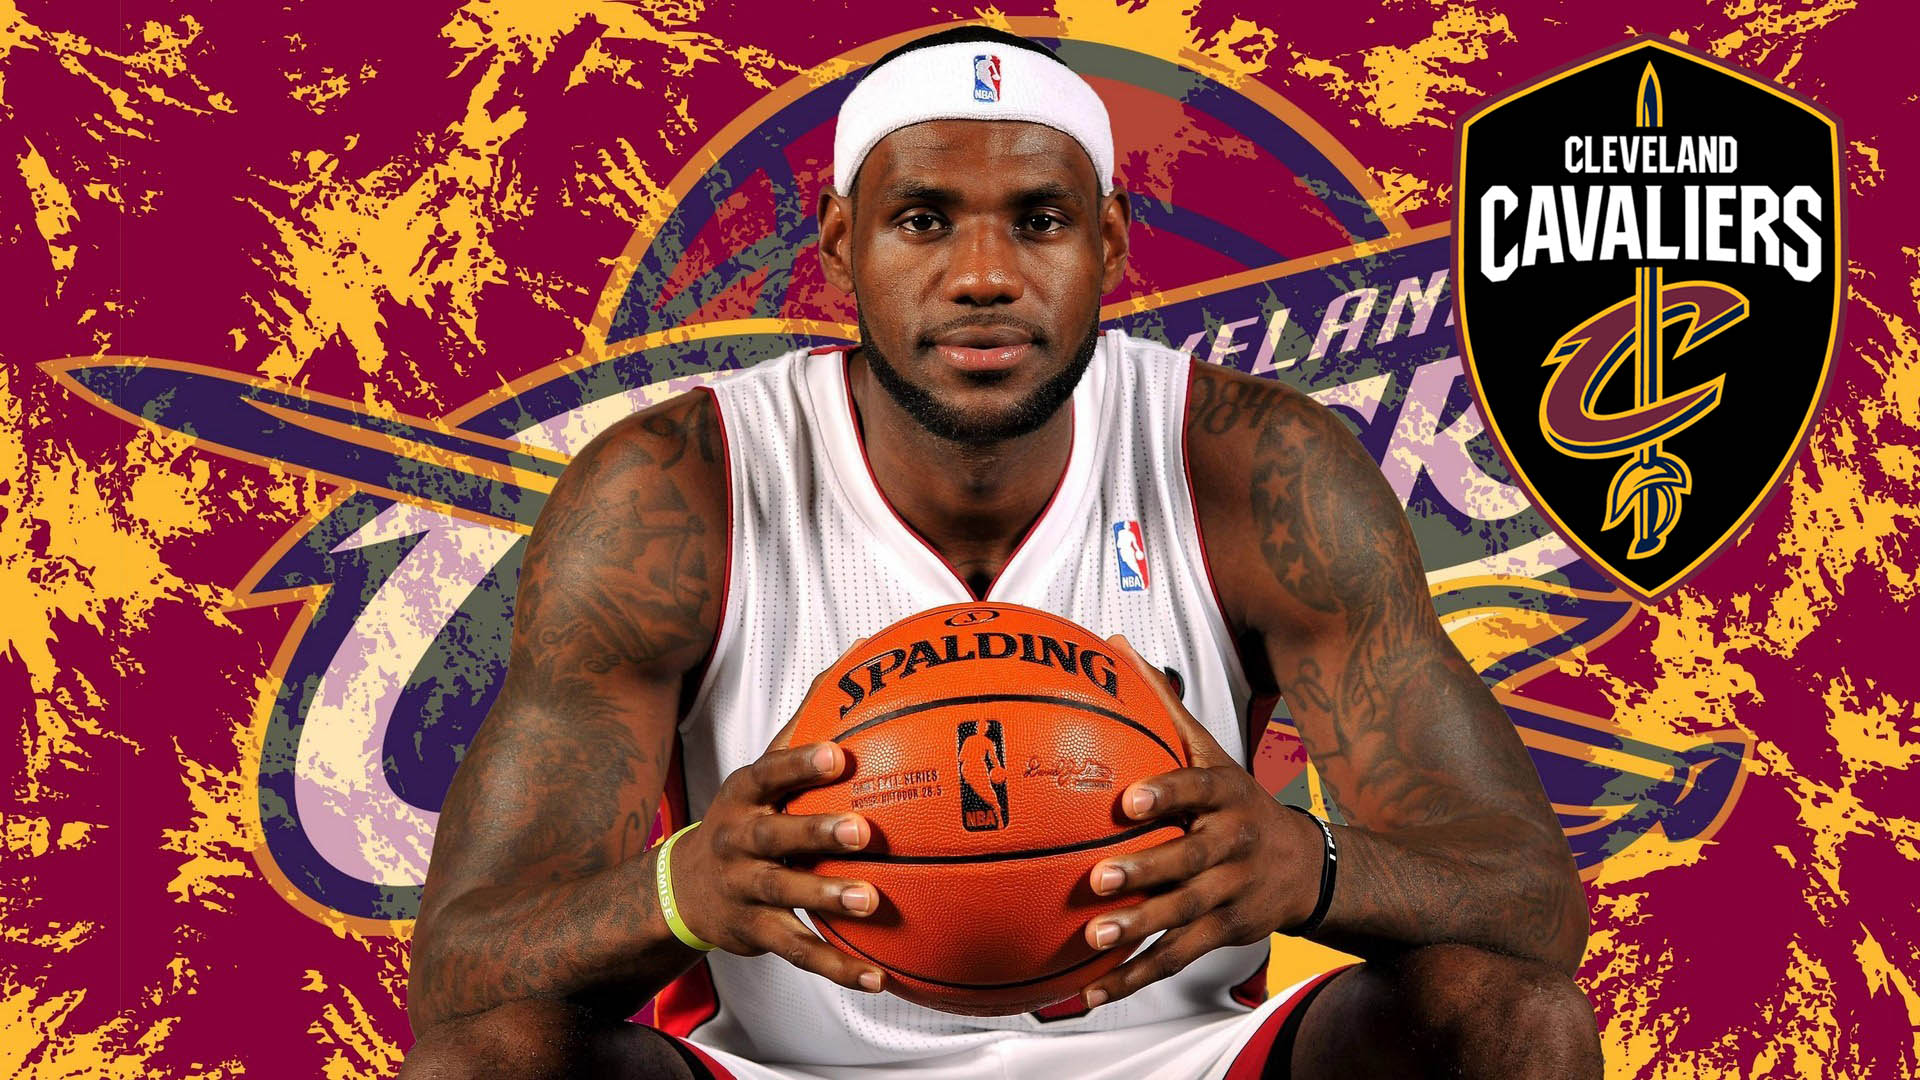 LeBron James Wallpaper For Mac Backgrounds 1920x1080